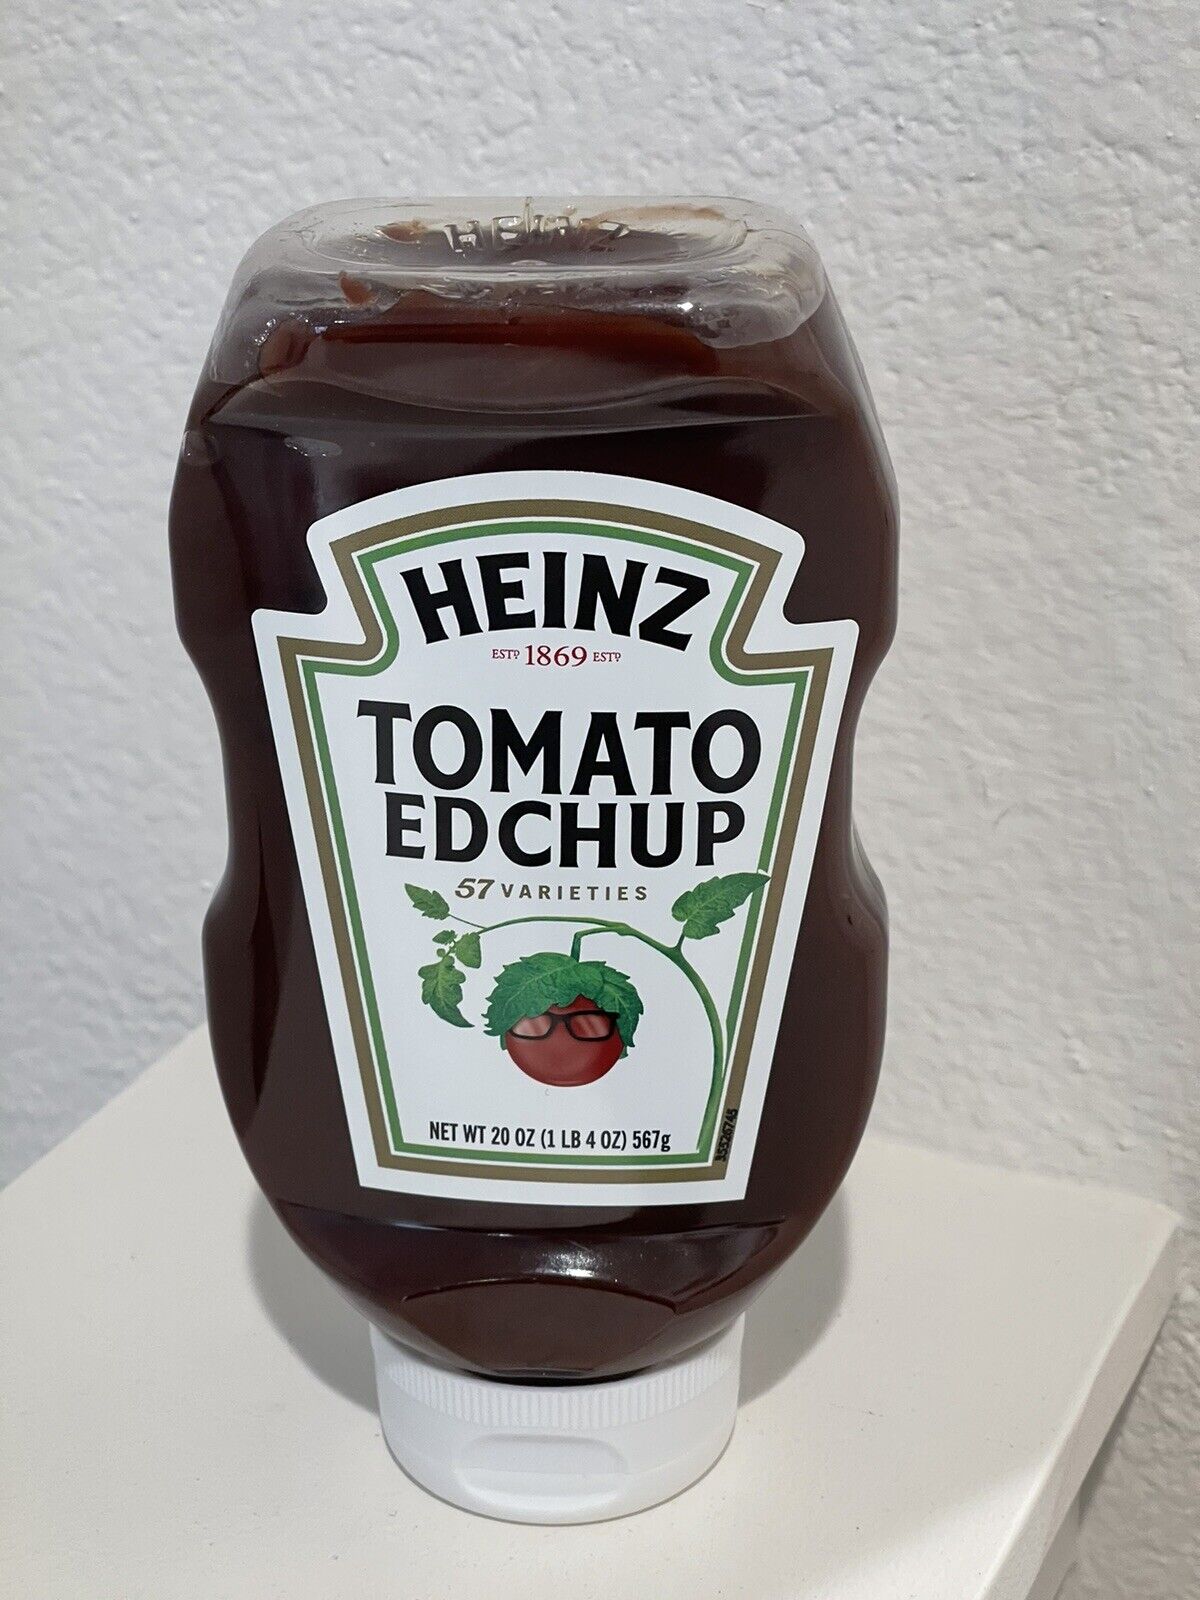 Ed Sheeran x Heinz Ketchup Edchup Limited Edition Sauce *SOLD OUT EVERYWHERE*